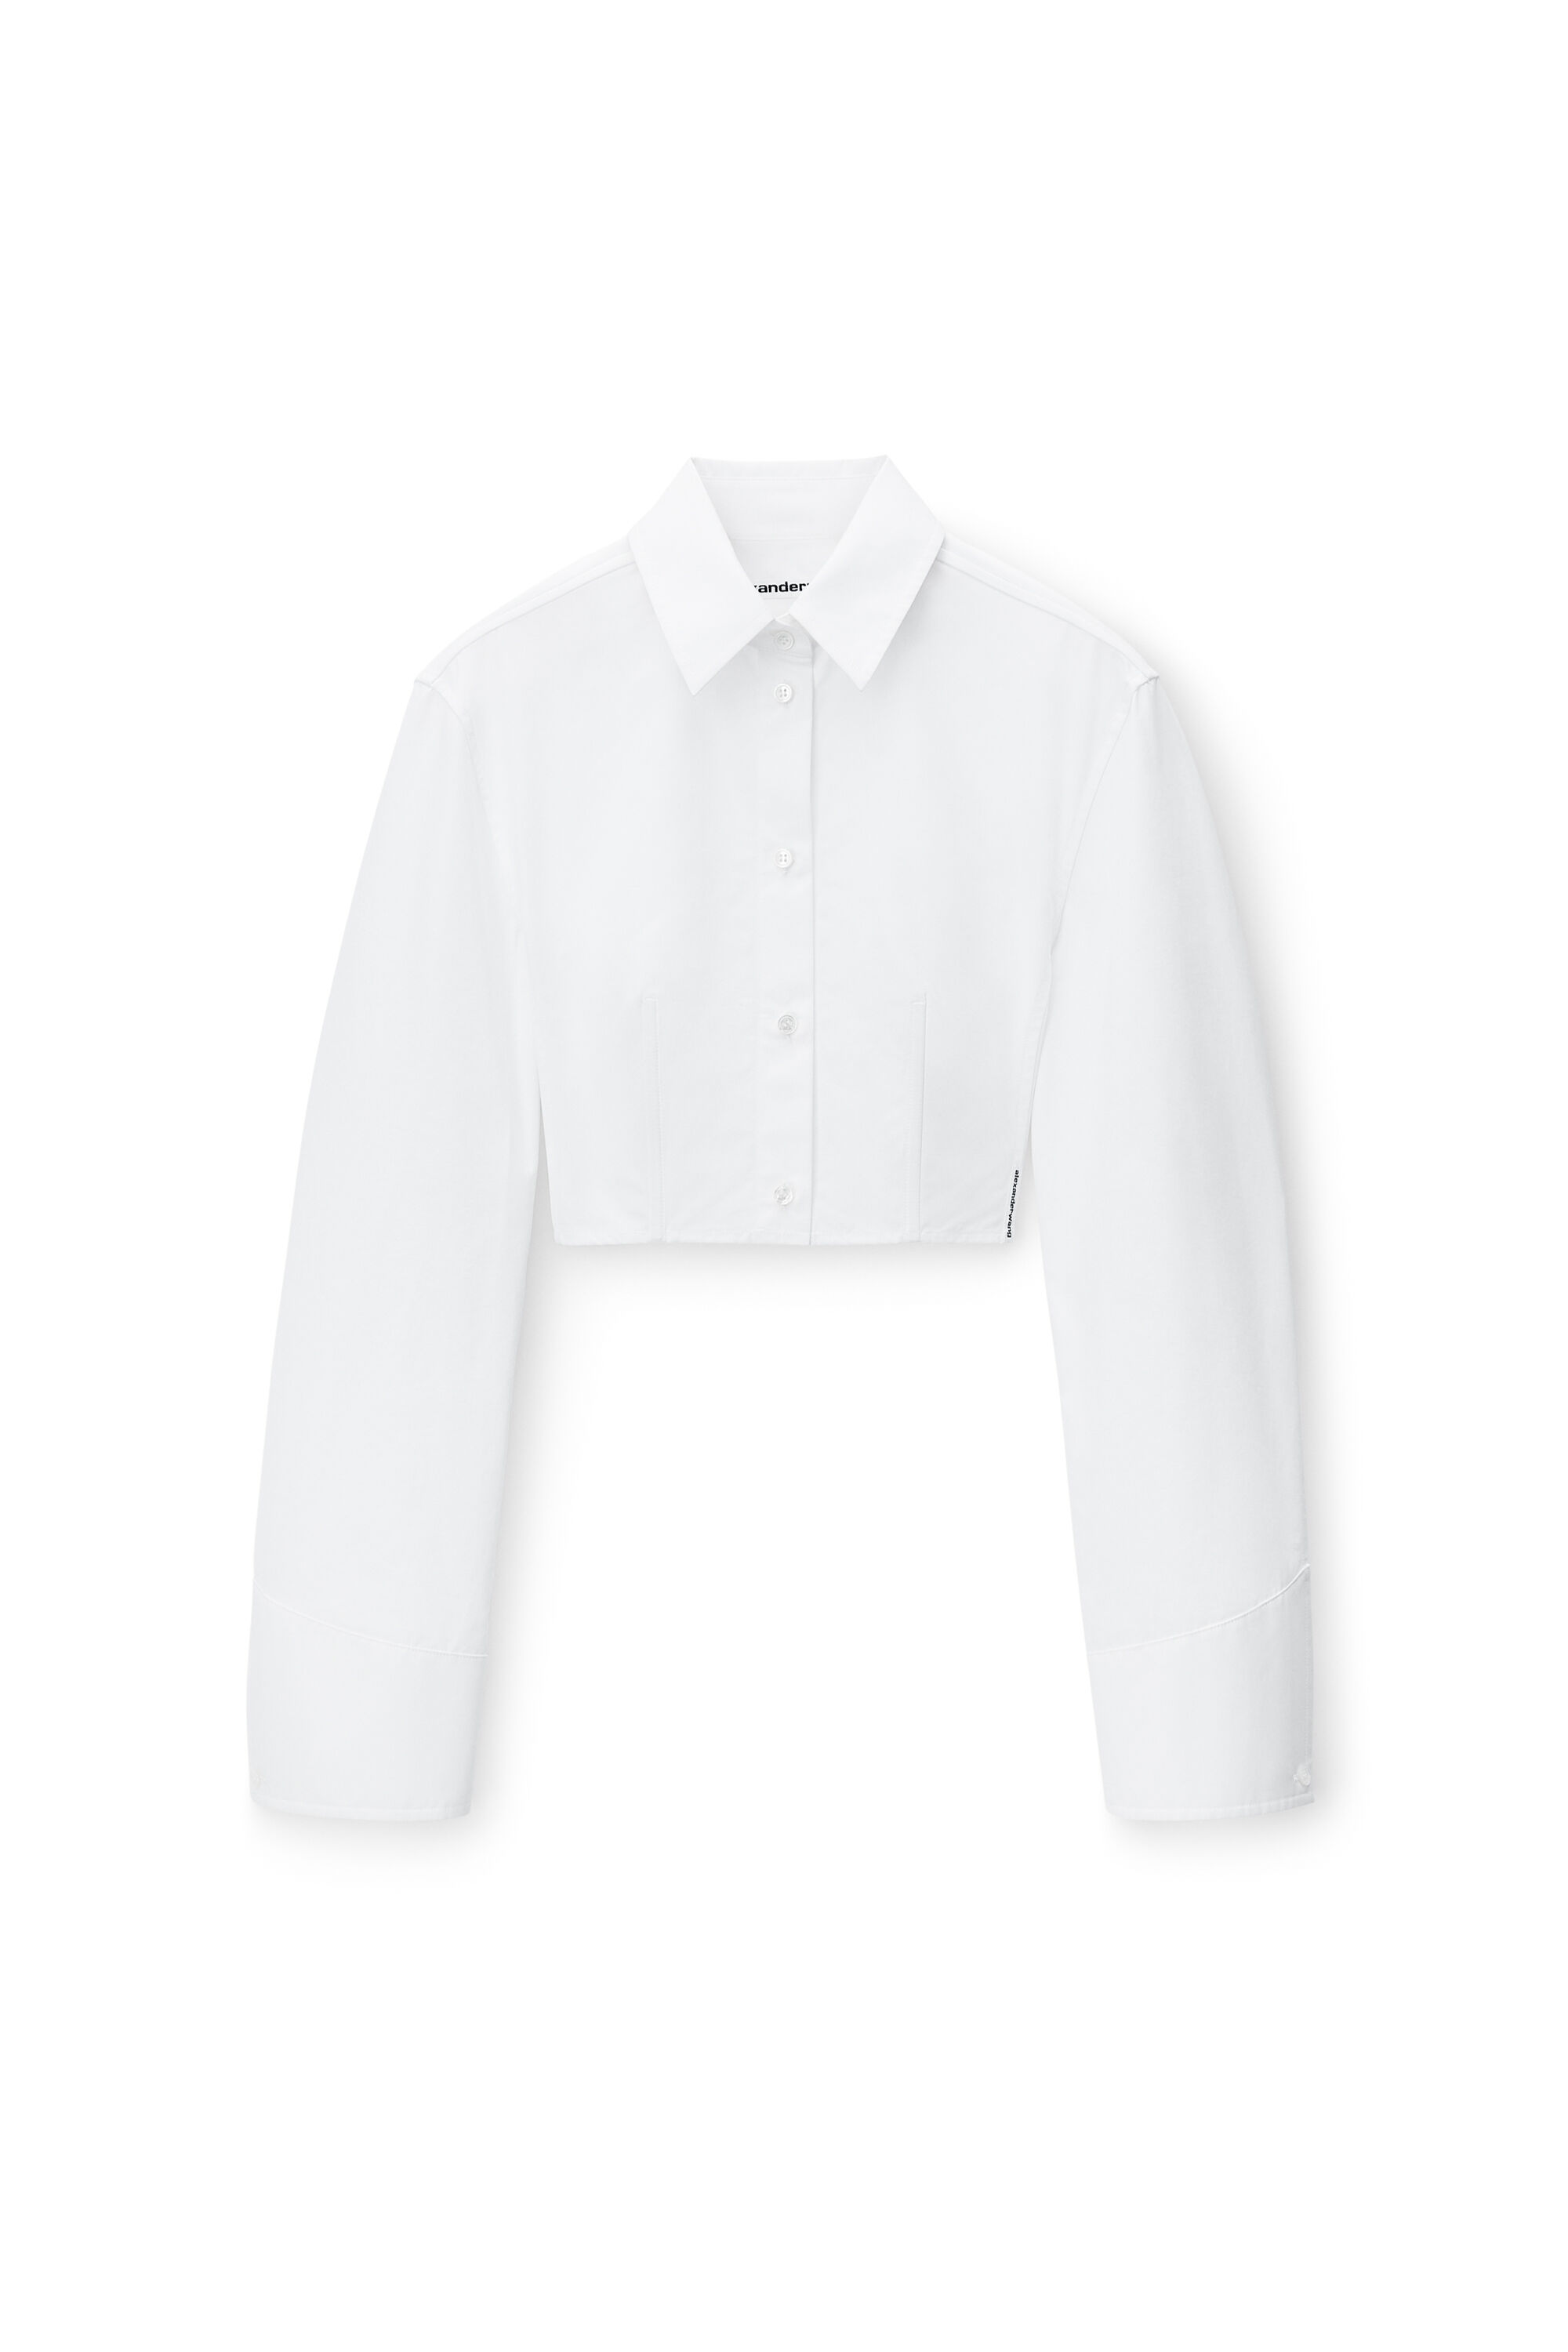 alexanderwang Cropped Structured Shirt in Organic Cotton WHITE 